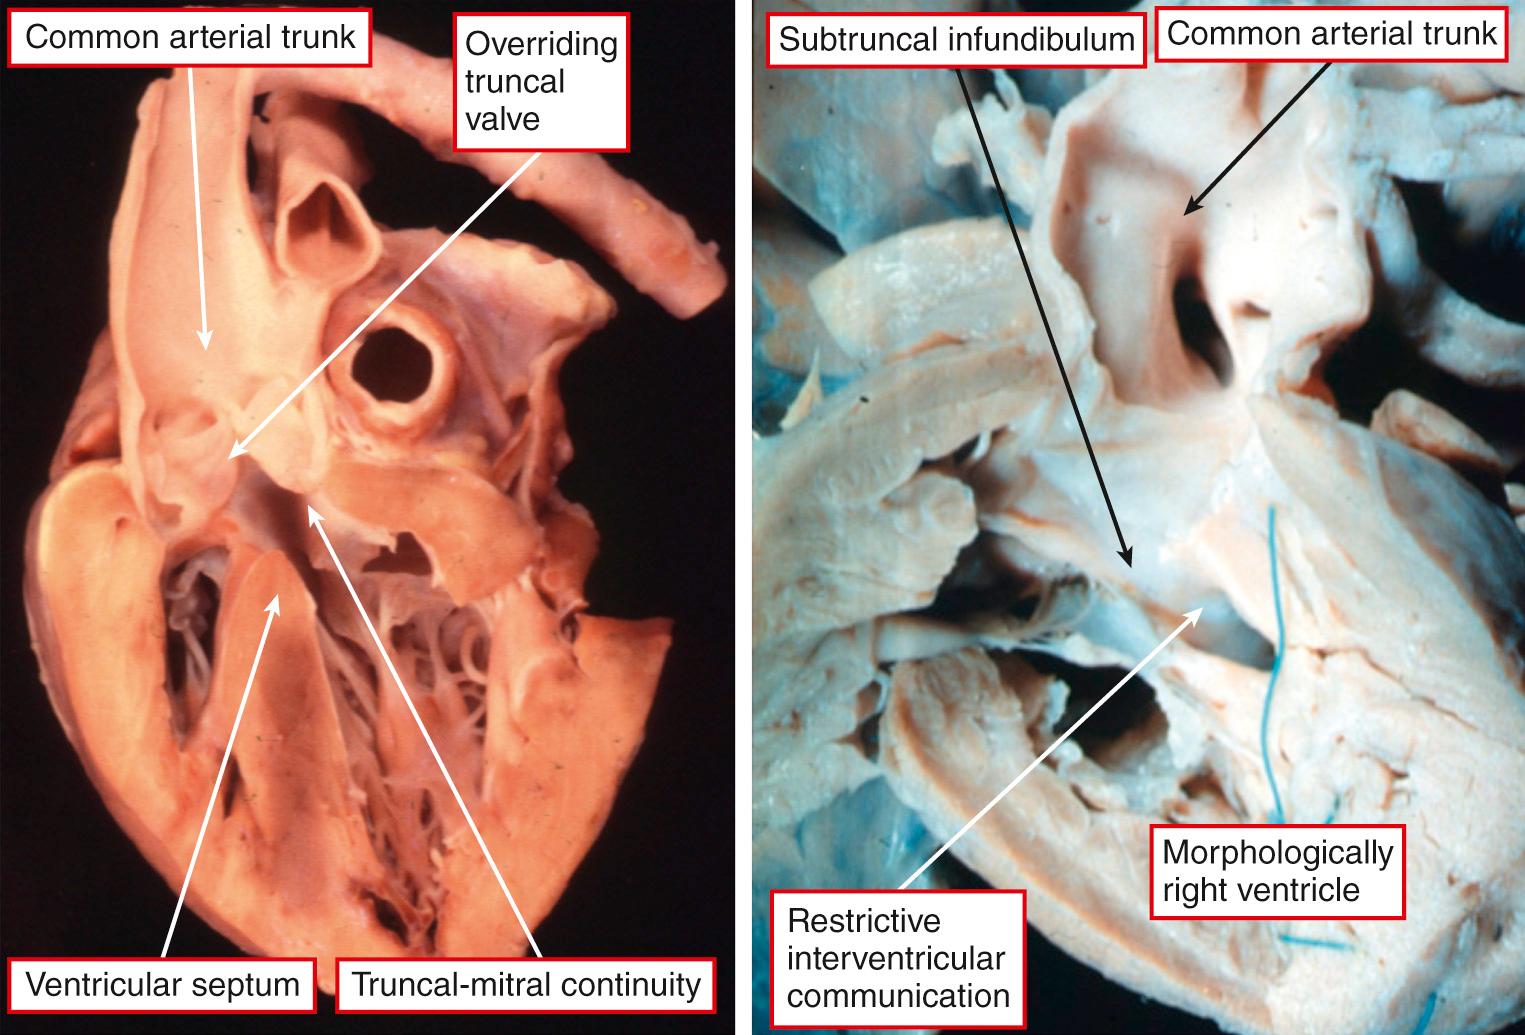 Fig. 40.3, Left, Heart sectioned to replicate the parasternal long axis echocardiographic section. It shows the truncal valve overriding the crest of the muscular ventricular septum, with the valvar leaflets supported in both ventricles. Note the fibrous continuity between the leaflets of the tricuspid and mitral valves. Right, In contrast, this heart has the trunk exclusively supported above the morphologically right ventricle, with a completely muscular subtruncal infundibulum.